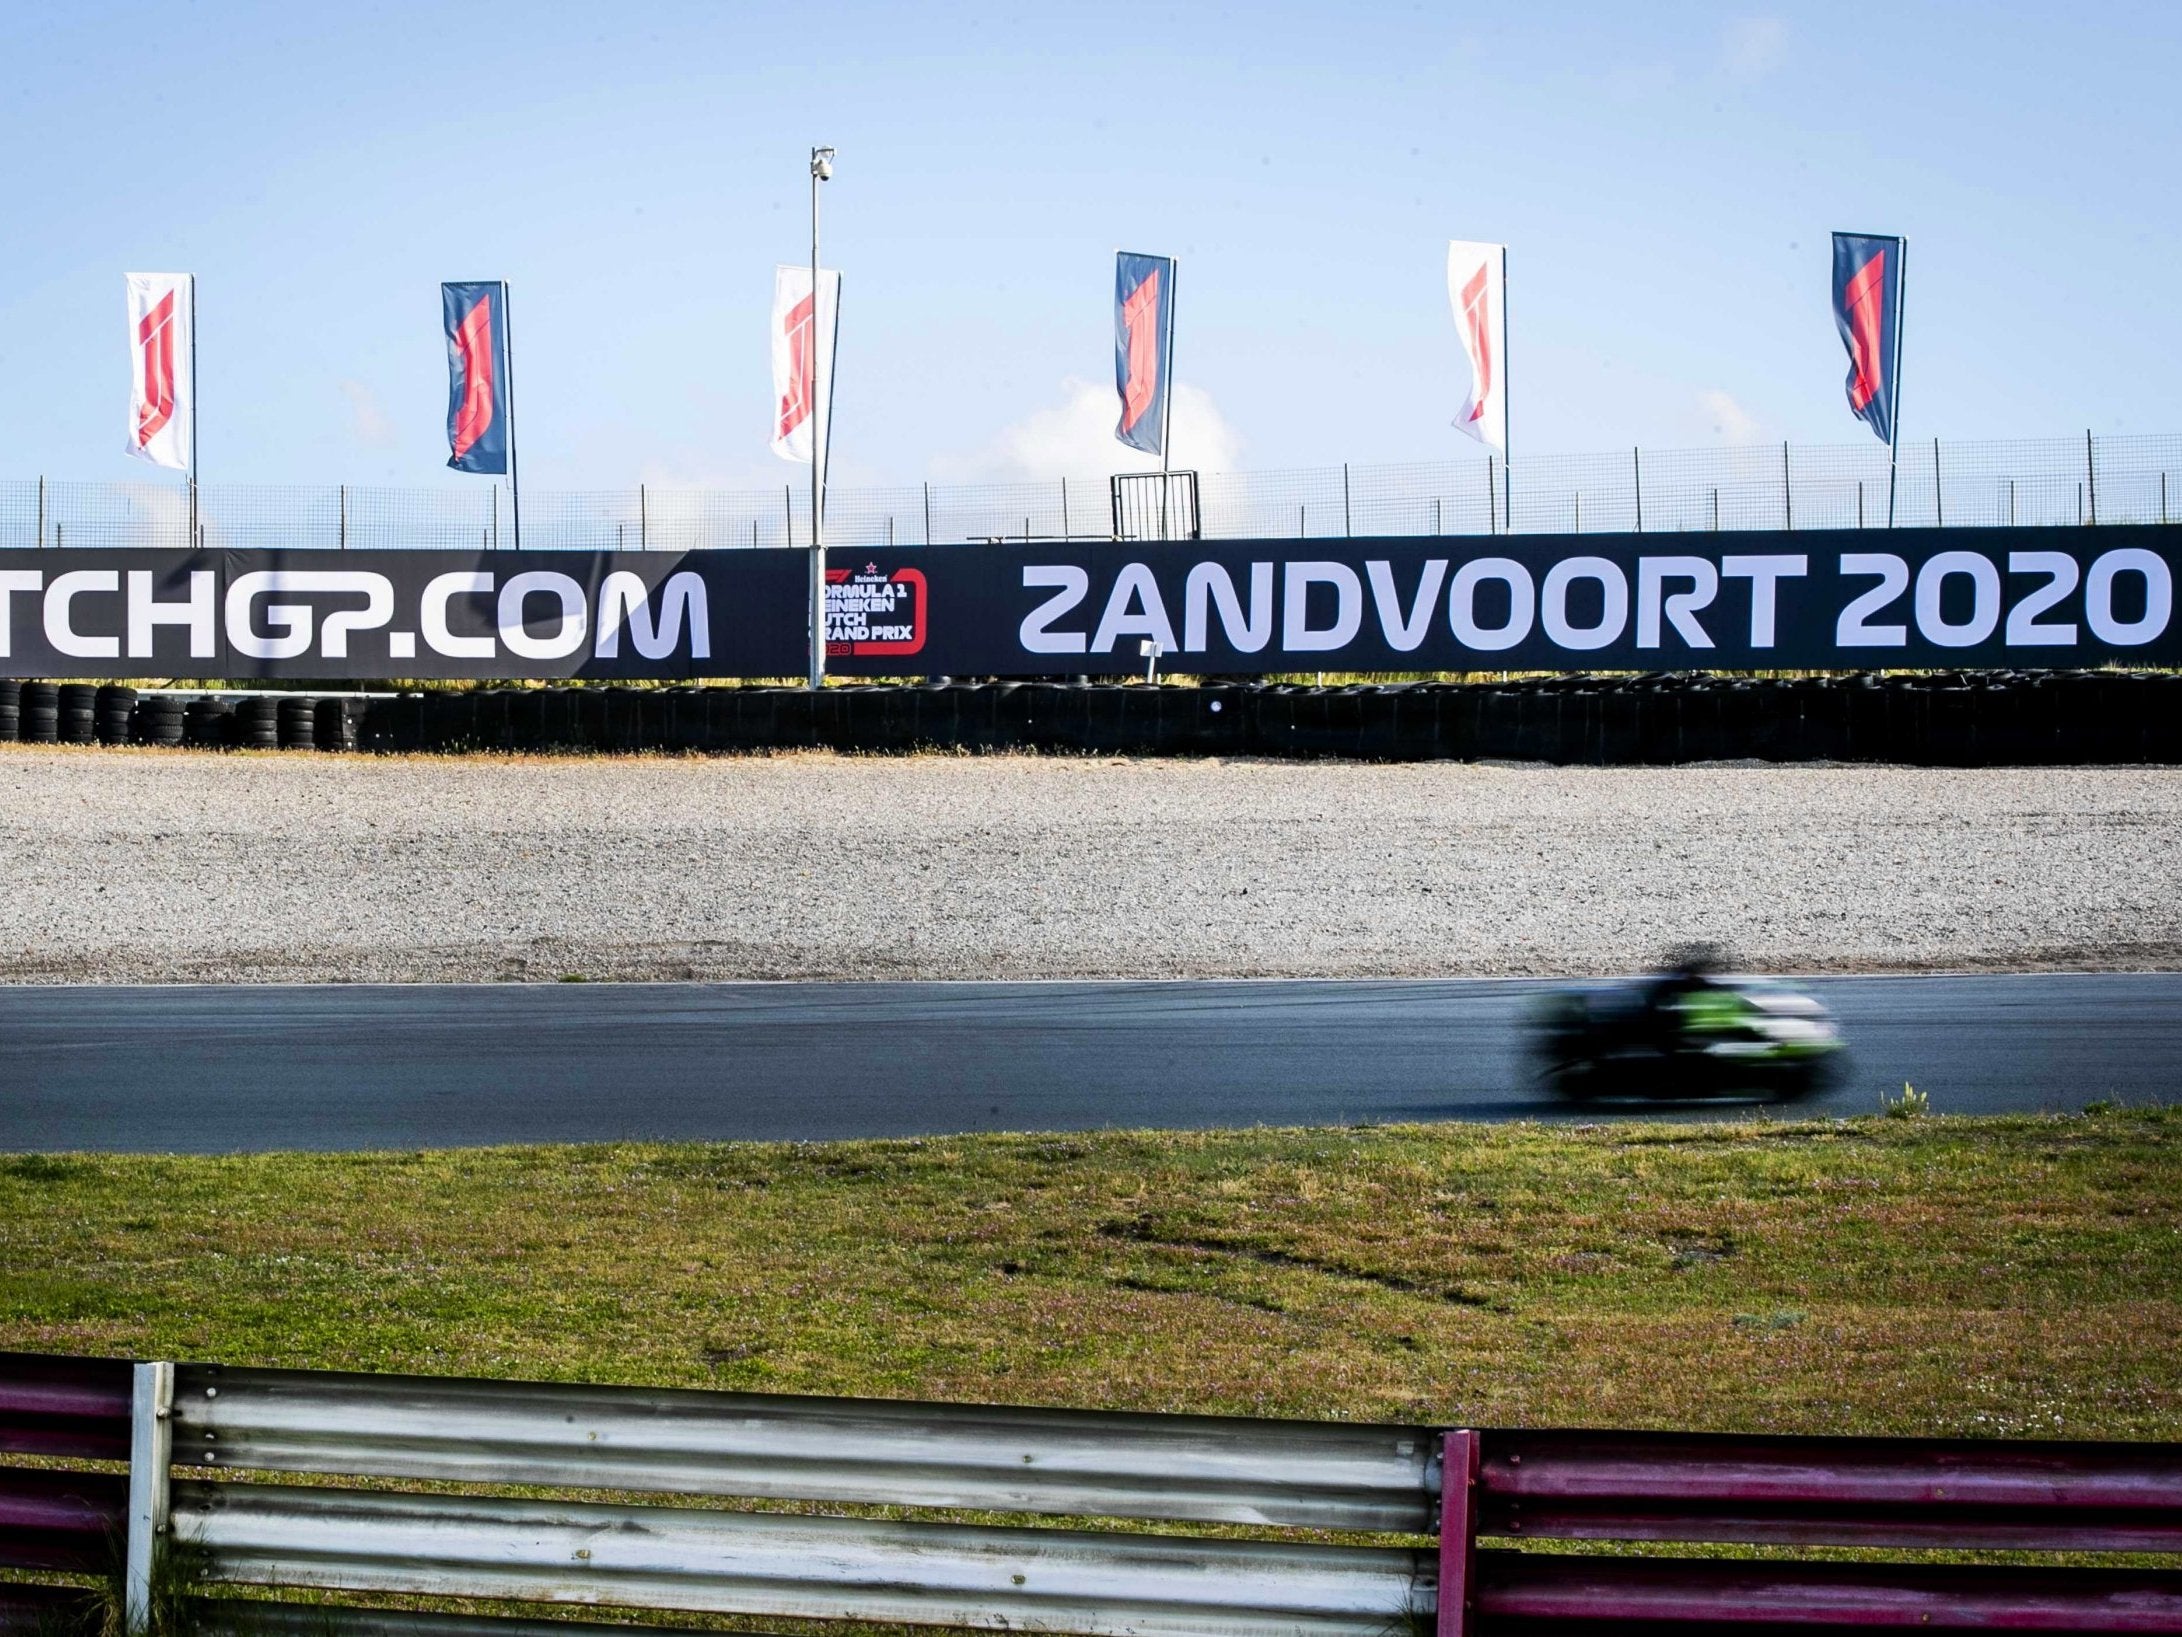 Zandvoort will host the Dutch Grand Prix for the first time since 1985